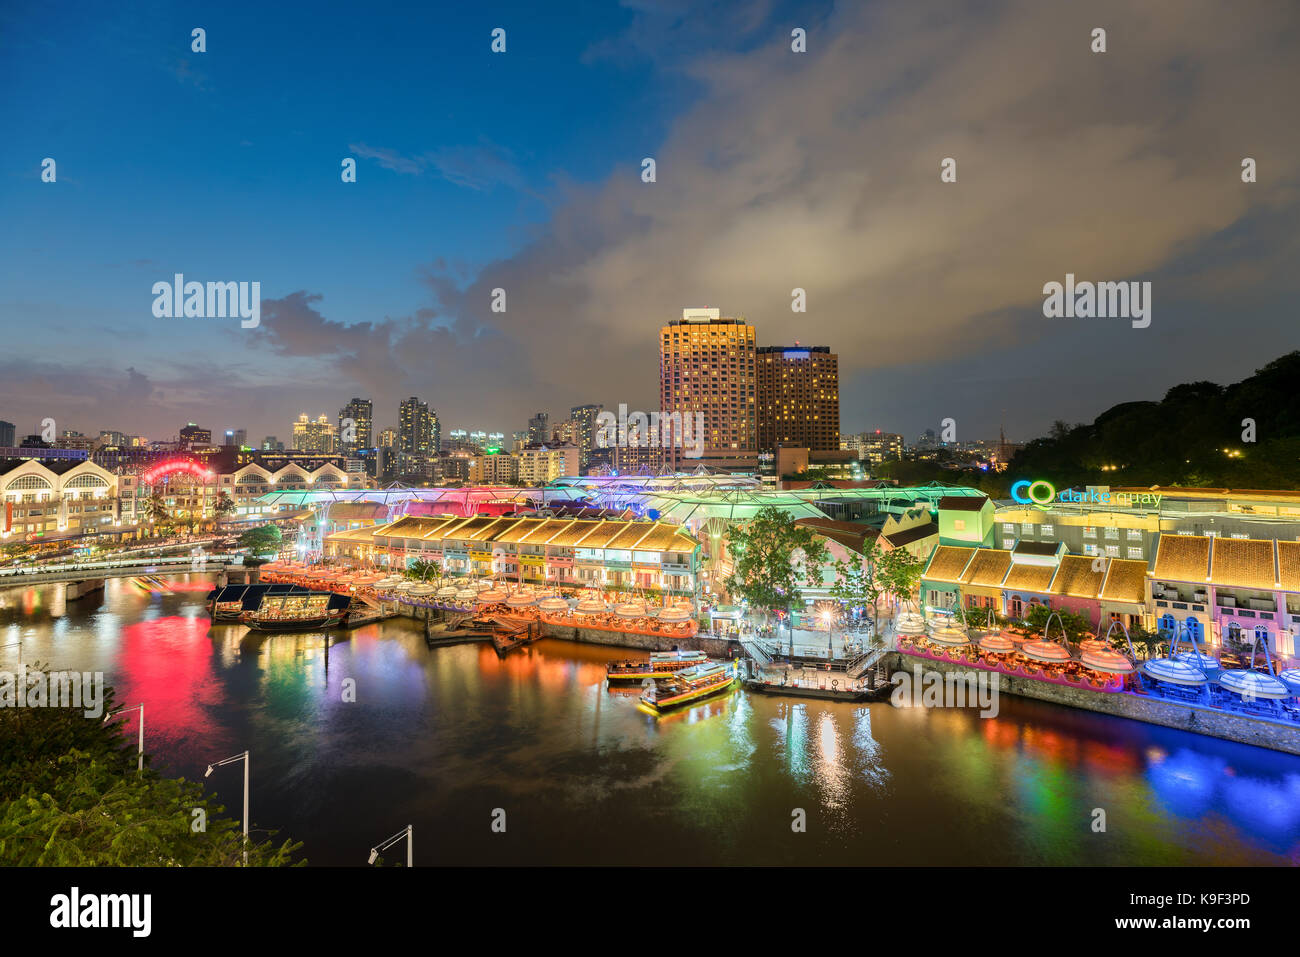 Colorful light building at night in Clarke Quay, Singapore. Clarke Quay, is a historical riverside quay in Singapore. Stock Photo